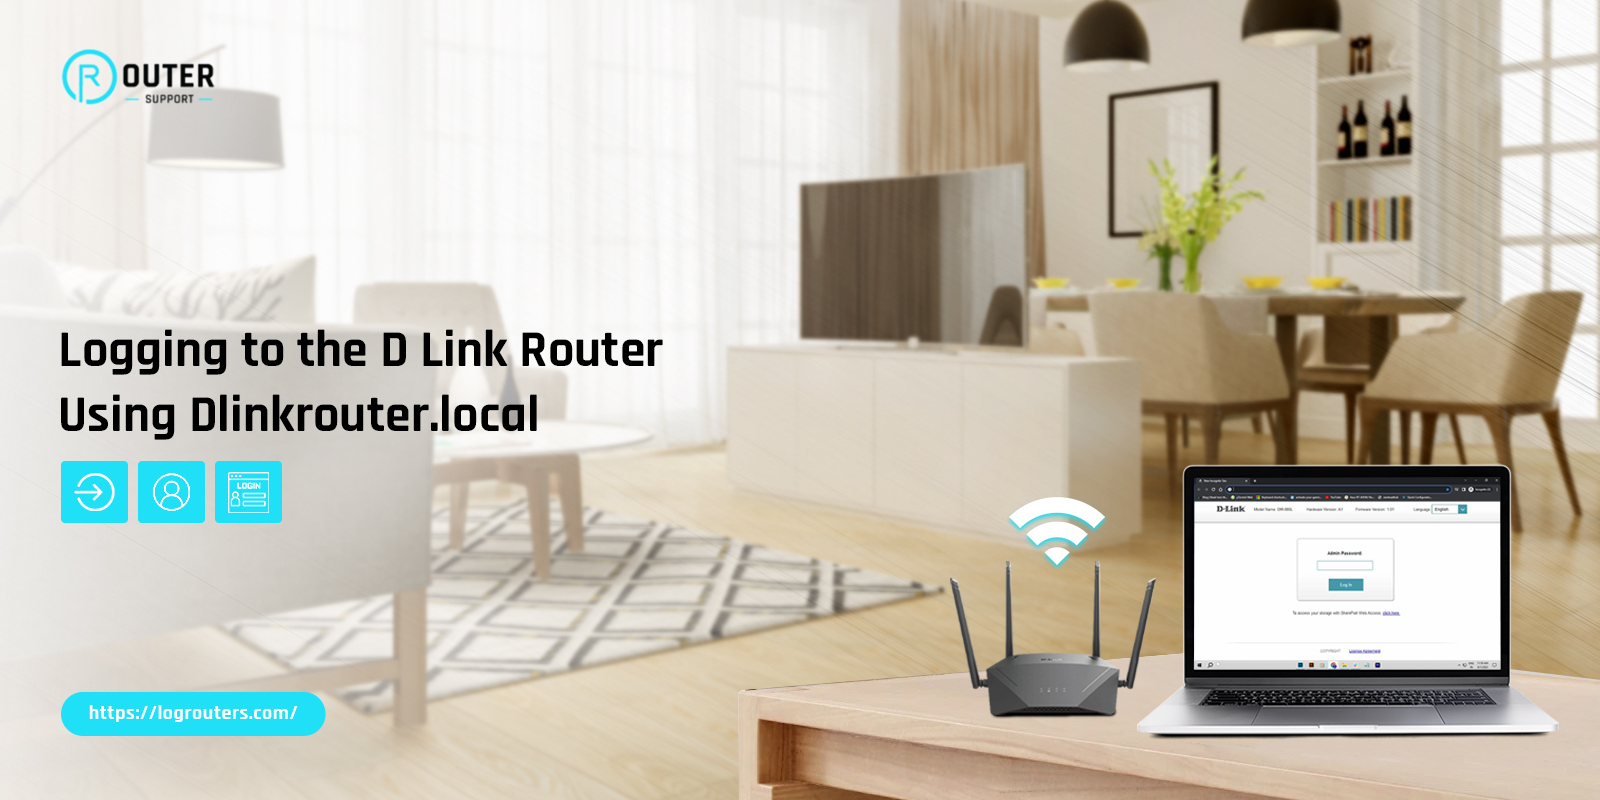 An Insider’s Guide to D-Link Router Login through dlinkrouter.local – George Barton